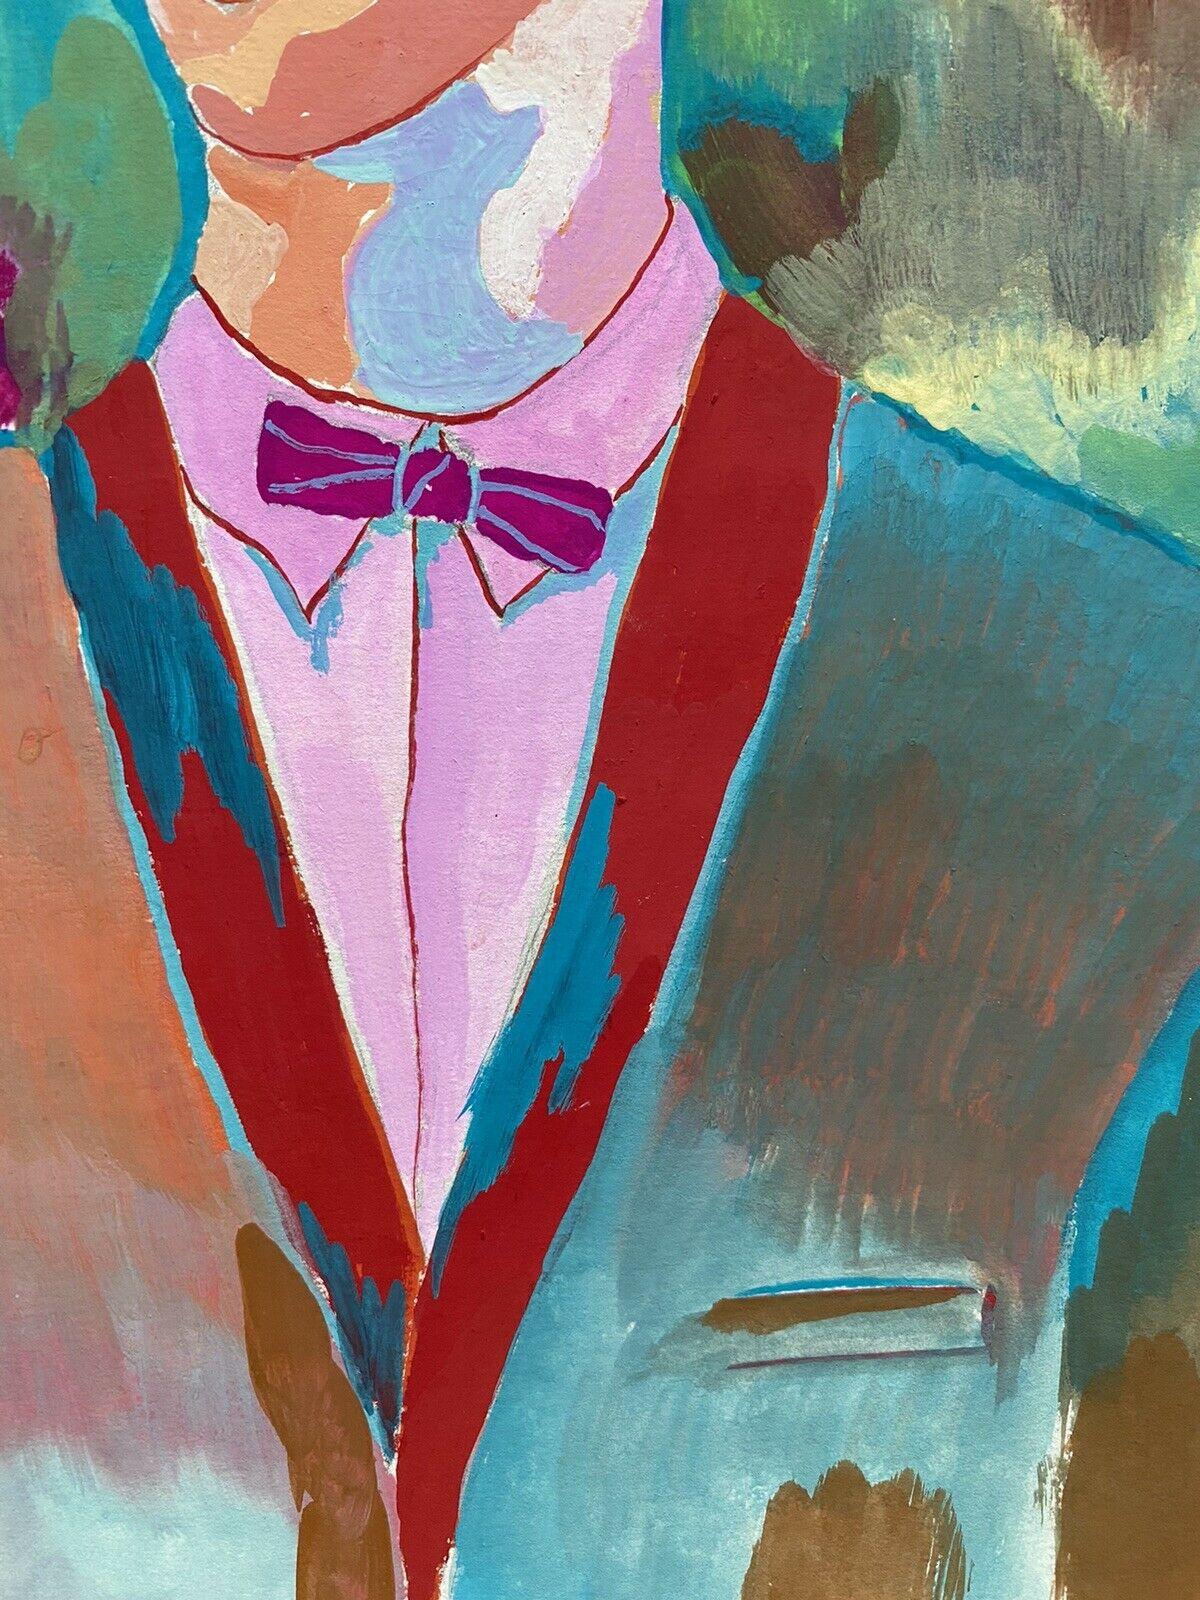 COLORFUL 20th CENTURY FRENCH MODERNIST PAINTING - MALE PORTRAIT BOW TIE CARDIGAN - Modern Painting by Jean Marc